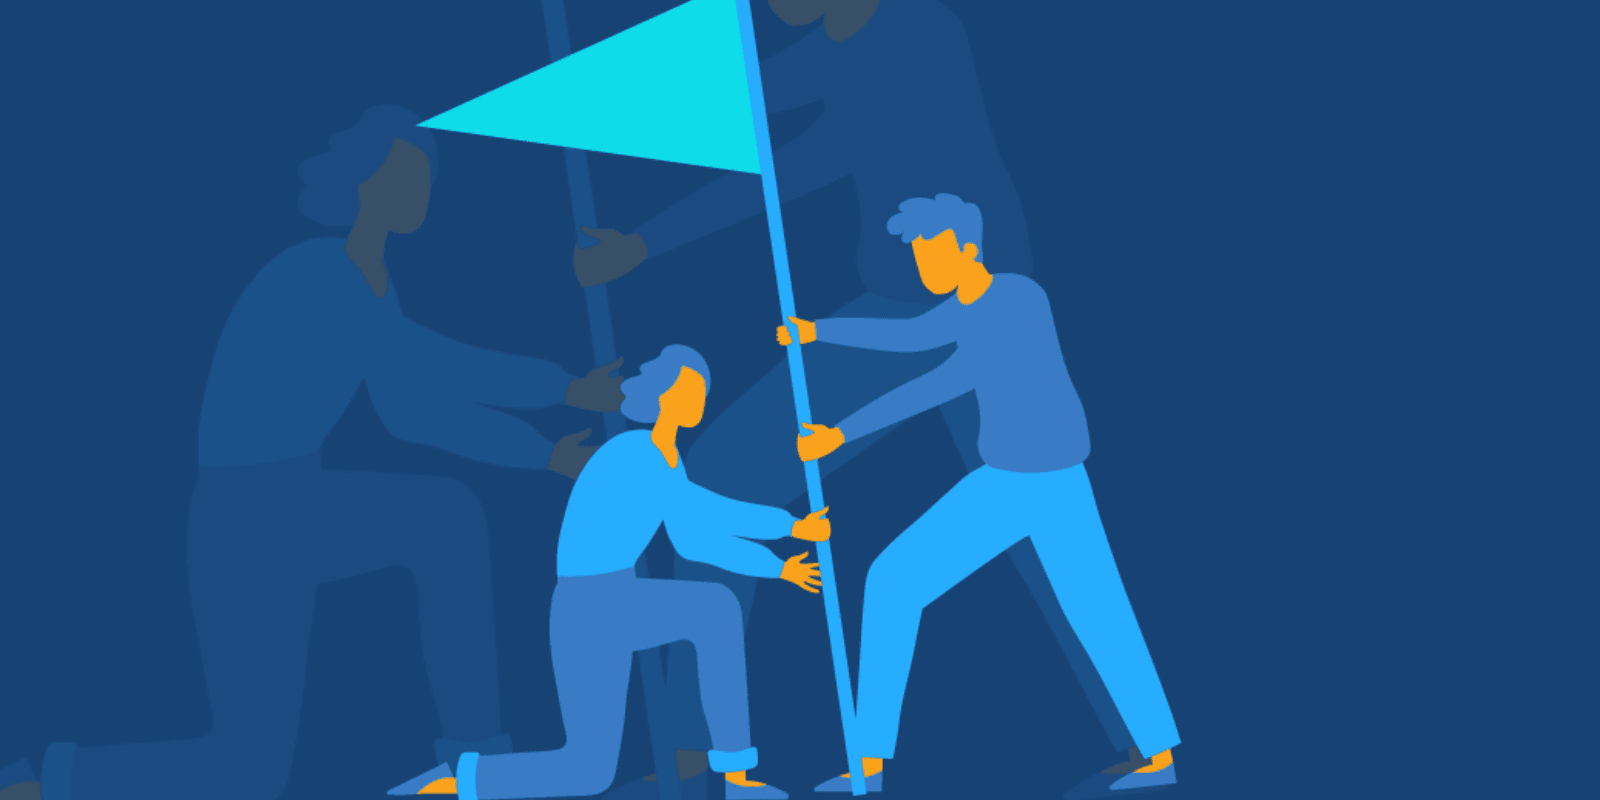 An illustration of two people putting a flag and a shadow behind them